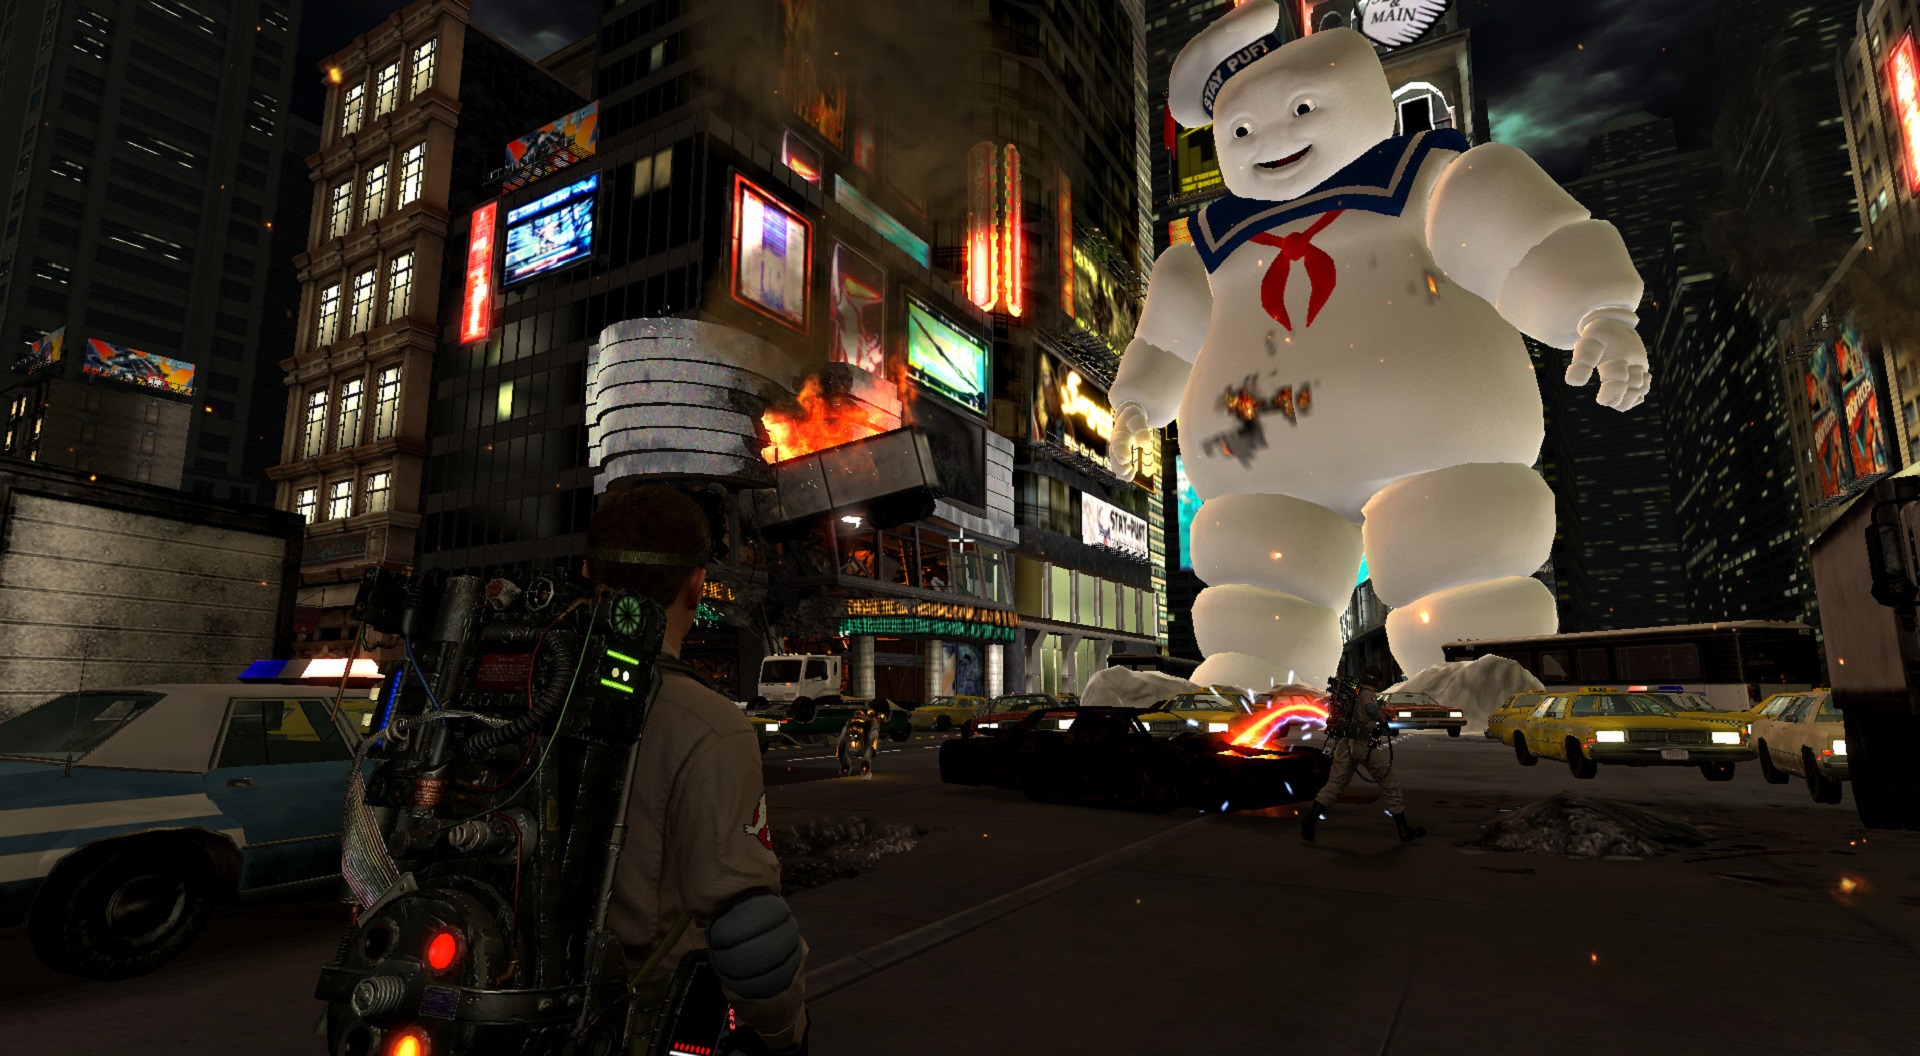 A ghostbuster stands in a ruined city street, Stay Puft Marshmallow man looms overhead